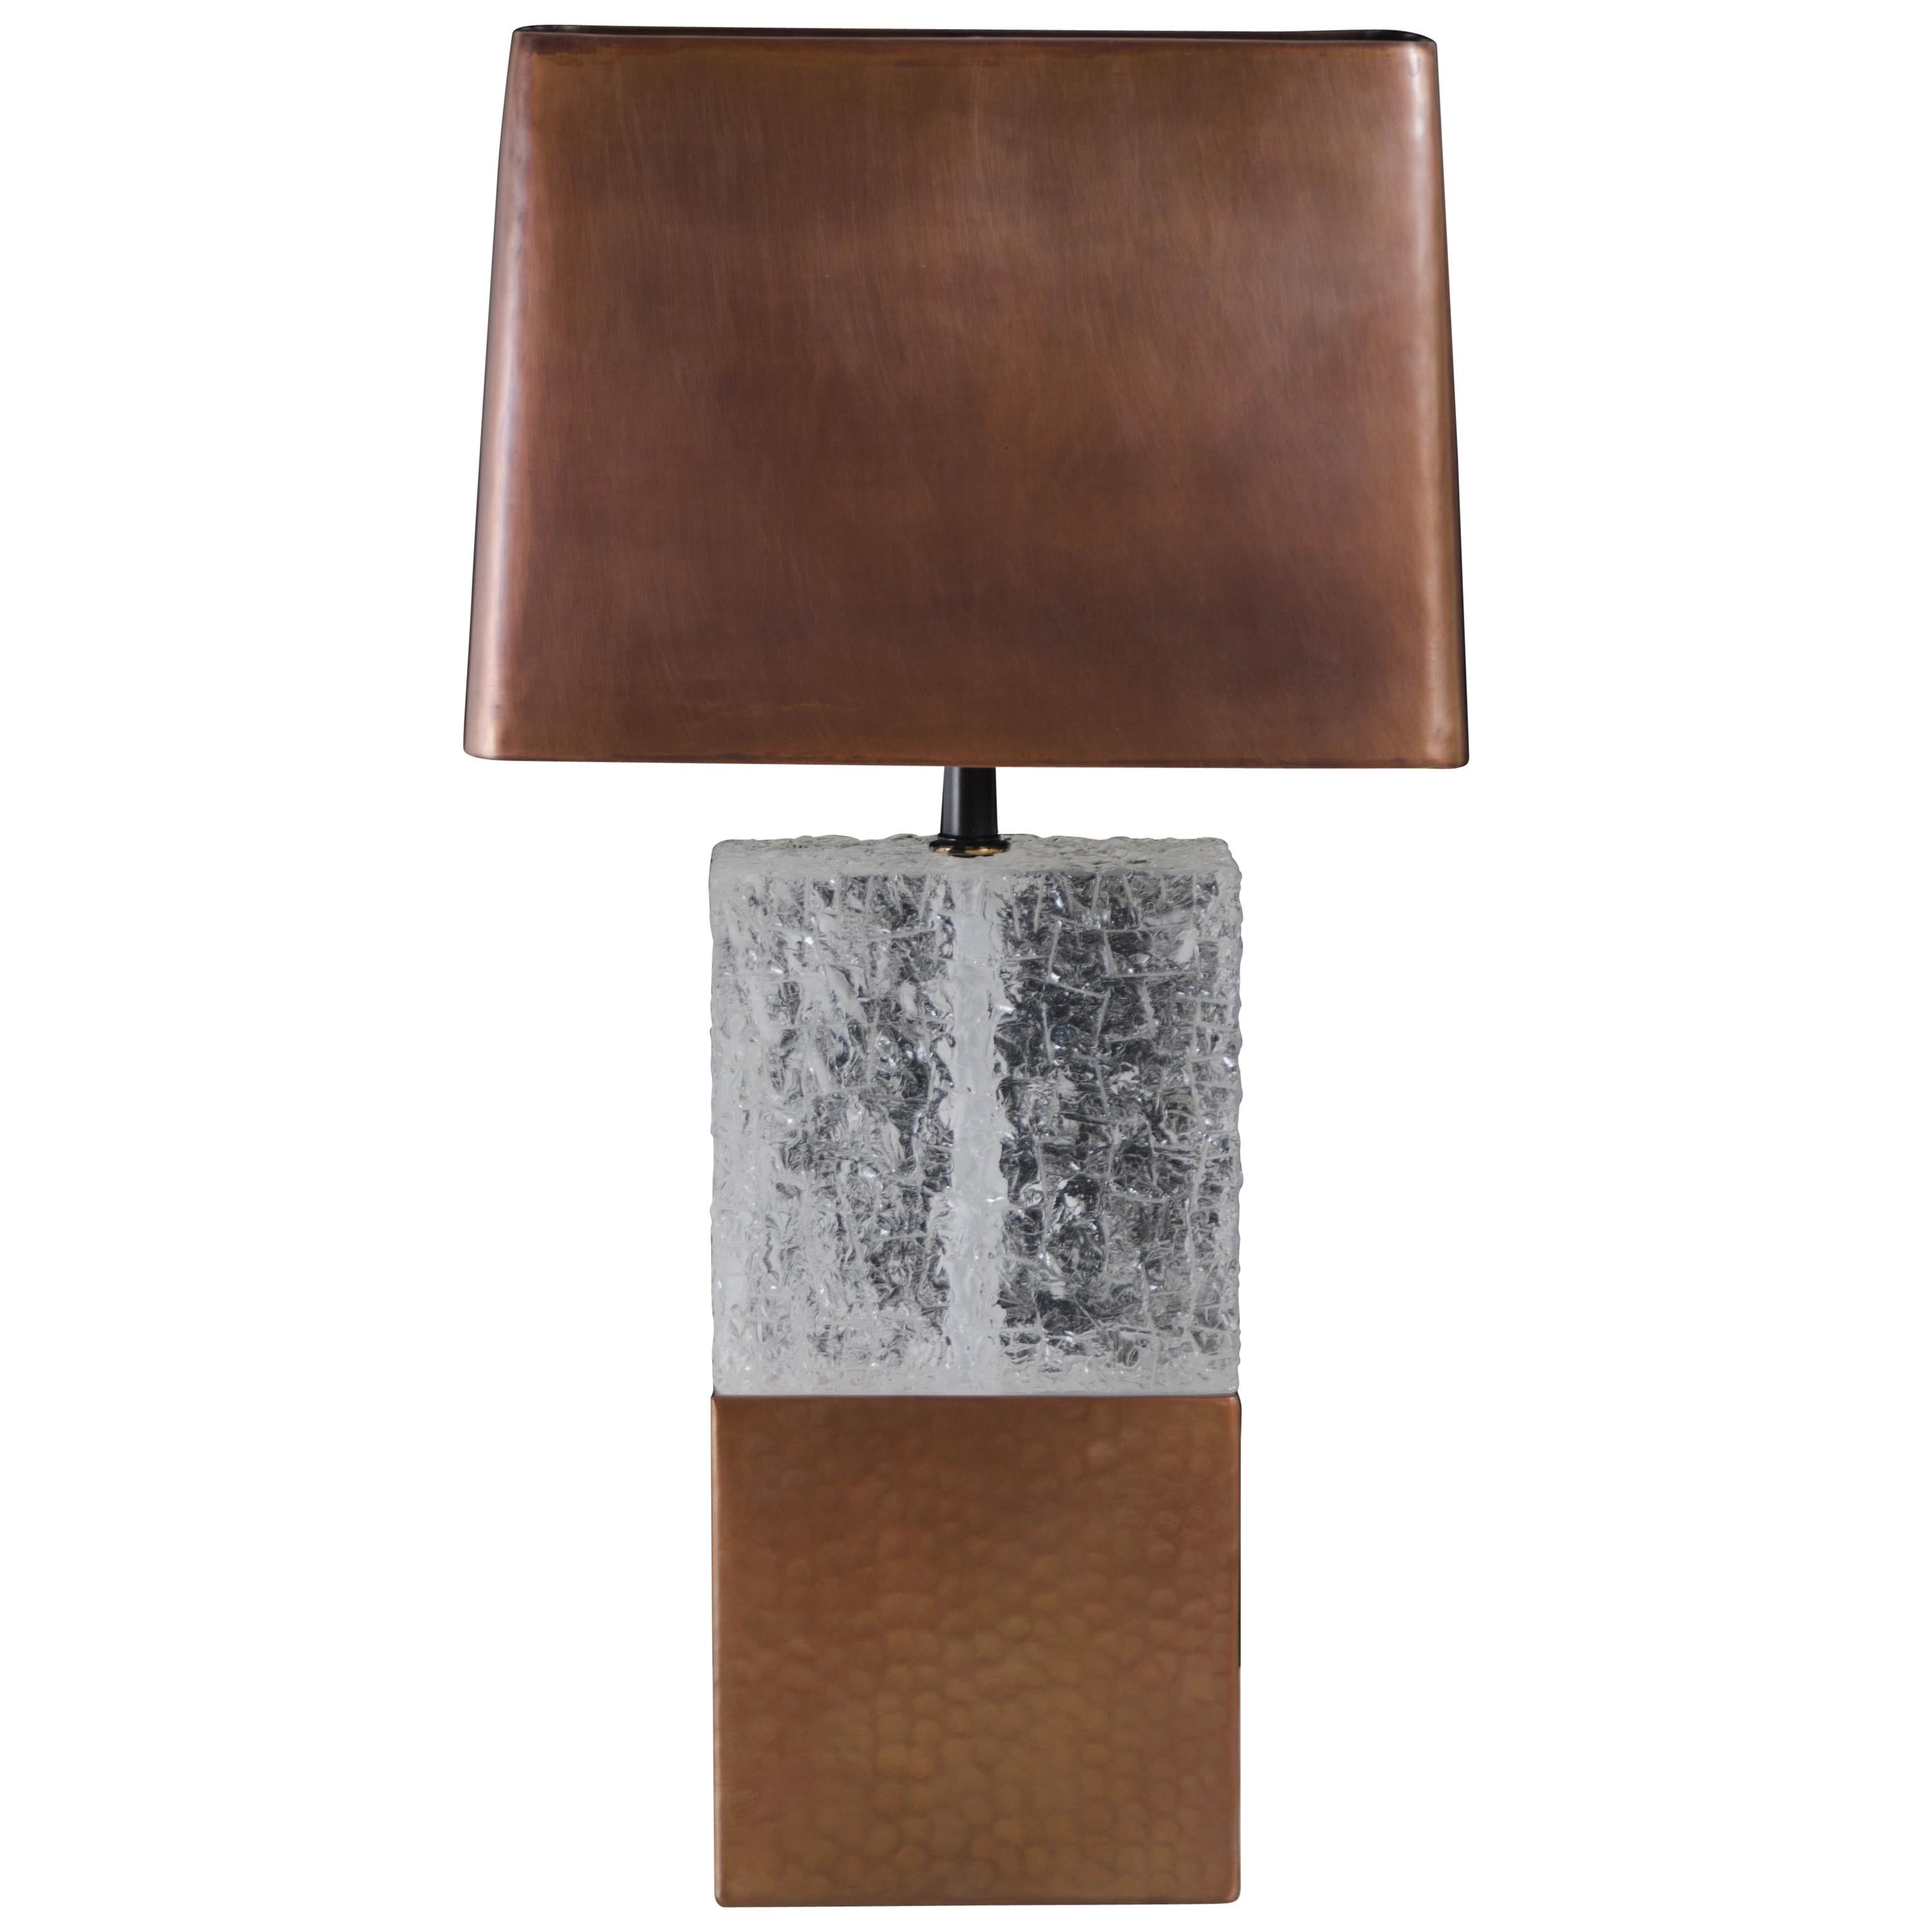 Double C Table Lamp with Copper Shade, Crystal and Copper by Robert Kuo Handmade For Sale